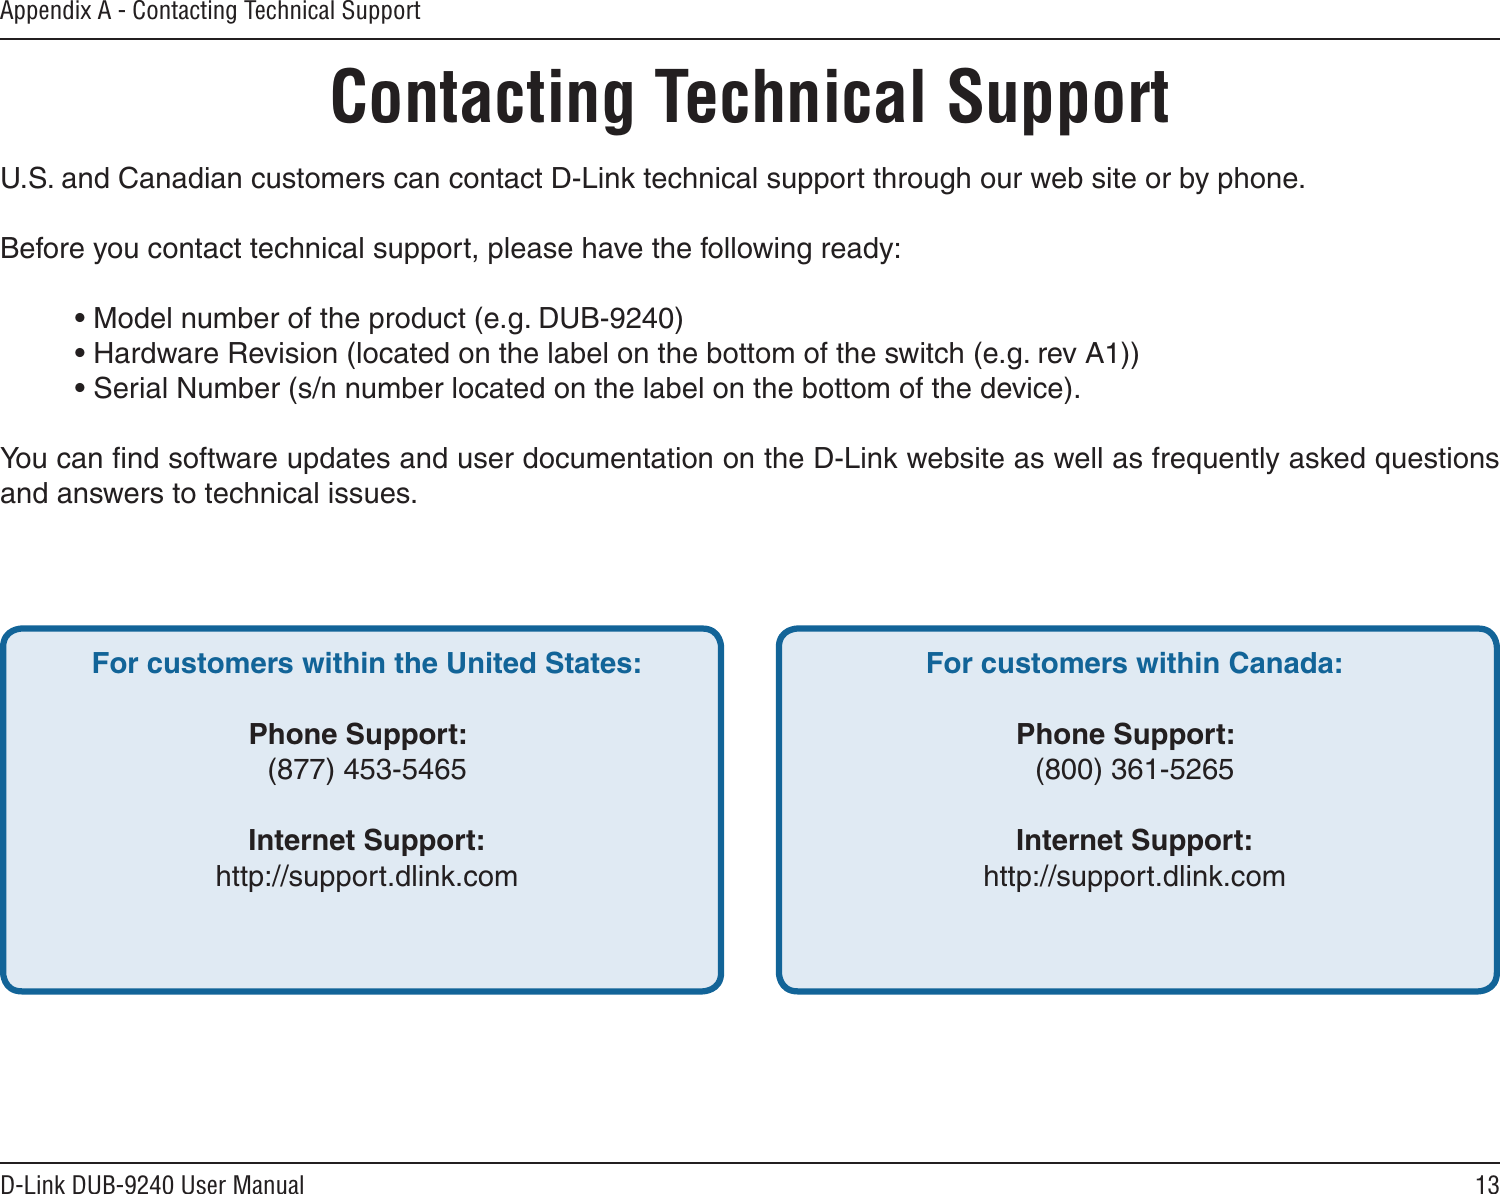 13D-Link DUB-9240 User ManualAppendix A - Contacting Technical SupportContacting Technical SupportU.S. and Canadian customers can contact D-Link technical support through our web site or by phone.Before you contact technical support, please have the following ready:  • Model number of the product (e.g. DUB-9240)  • Hardware Revision (located on the label on the bottom of the switch (e.g. rev A1))  • Serial Number (s/n number located on the label on the bottom of the device). You can ﬁnd software updates and user documentation on the D-Link website as well as frequently asked questions and answers to technical issues.For customers within the United States: Phone Support:  (877) 453-5465 Internet Support:  http://support.dlink.com For customers within Canada: Phone Support:  (800) 361-5265  Internet Support:  http://support.dlink.com 